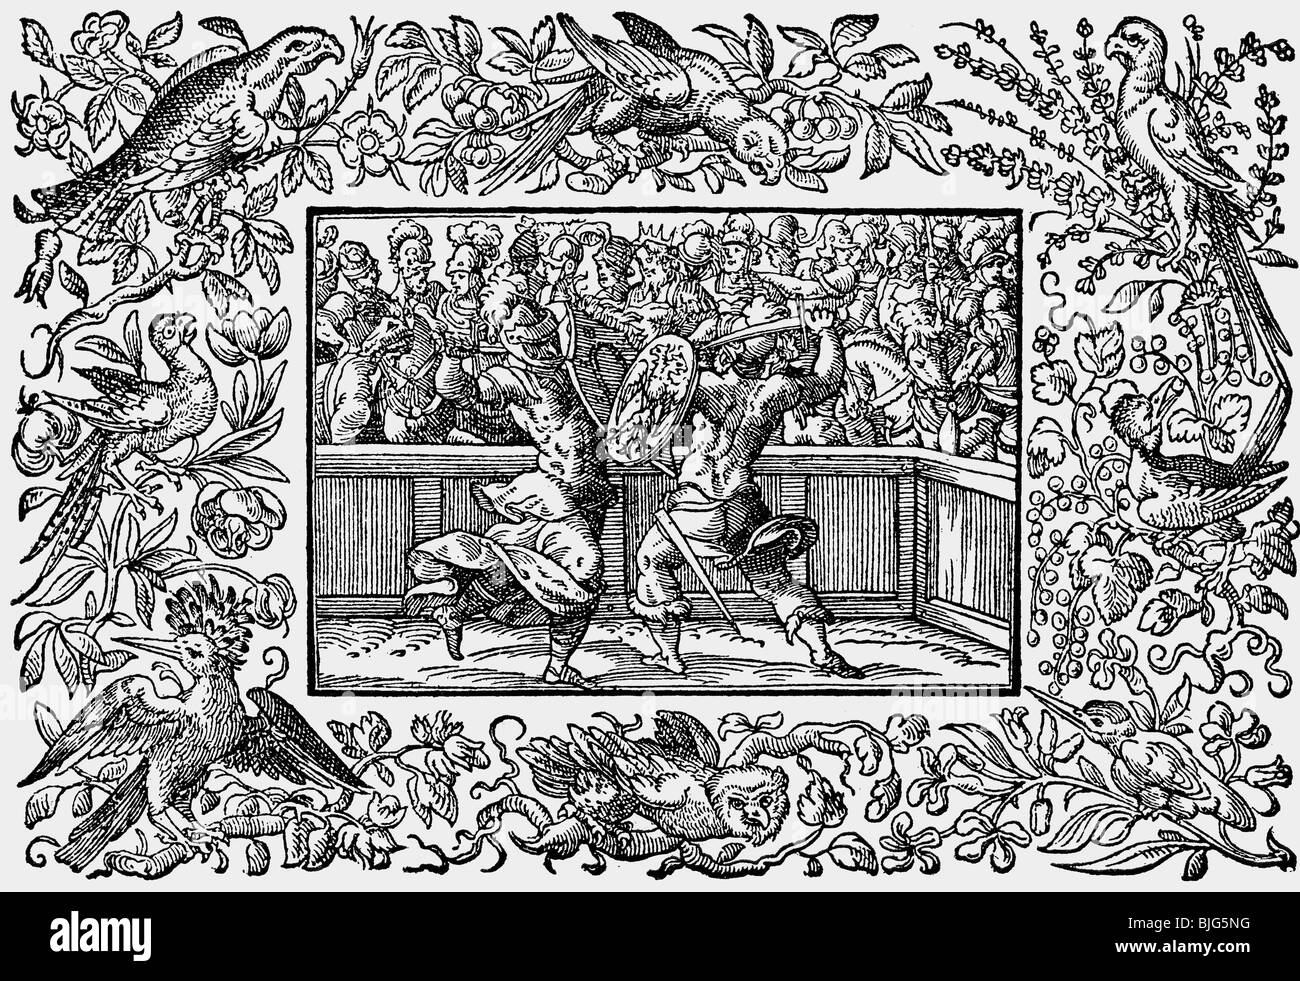 fine arts, Amman, Jost (1539-1591), woodcut, fight scene, from "Heldenbuch", printed by Sigmund Feyerabend, Frankfurt on the Main, Germany, 1590, facsimile from "Der Formenschatz" (Art Treasure) published by Georg Hirth, 1884, Artist's Copyright has not to be cleared Stock Photo